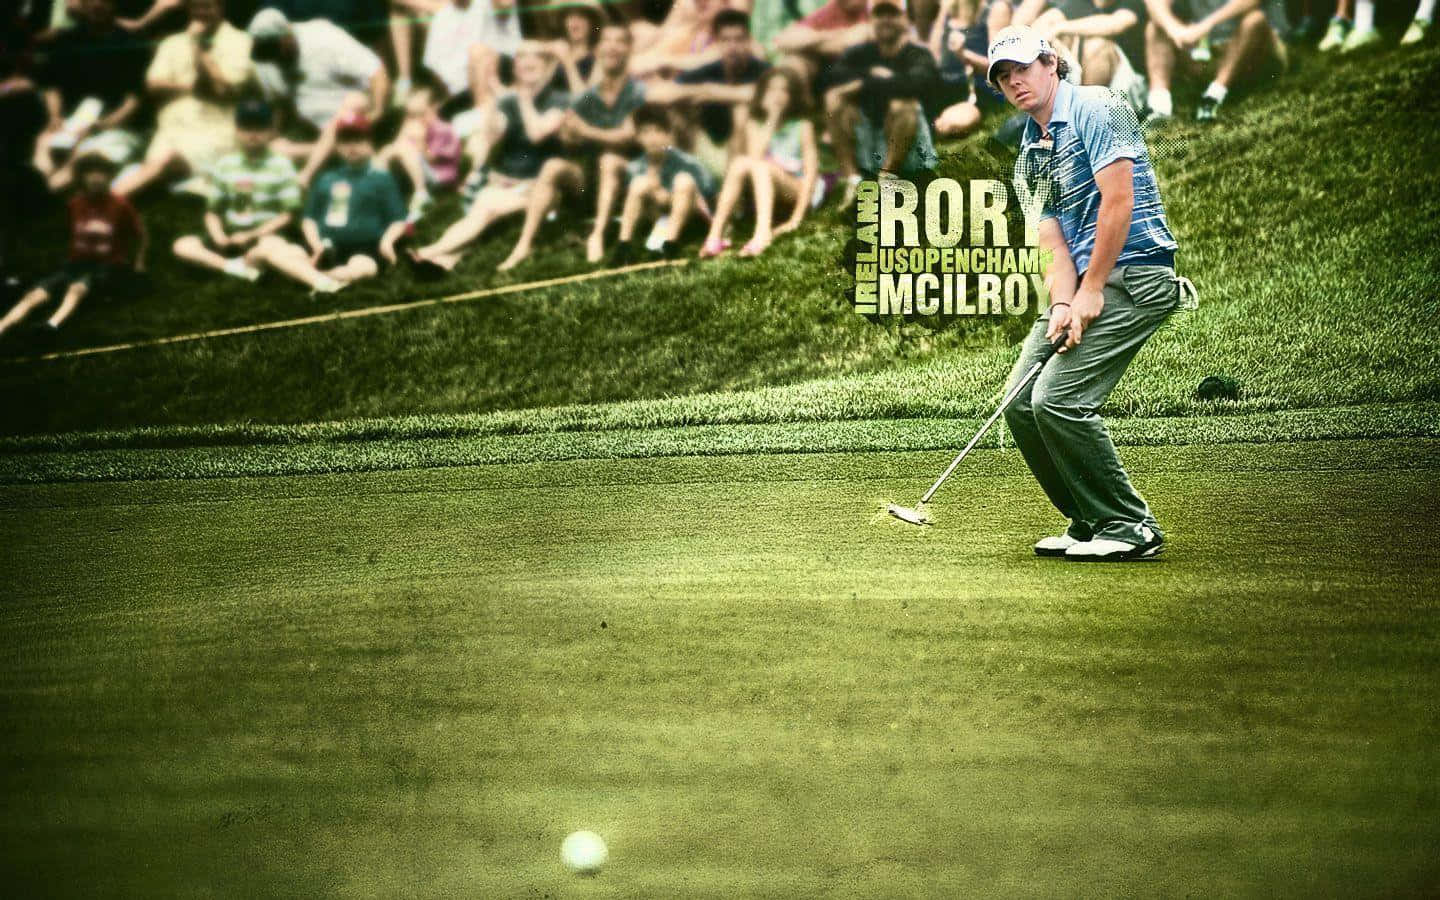 Rory Mcllroy waits for his shot Wallpaper